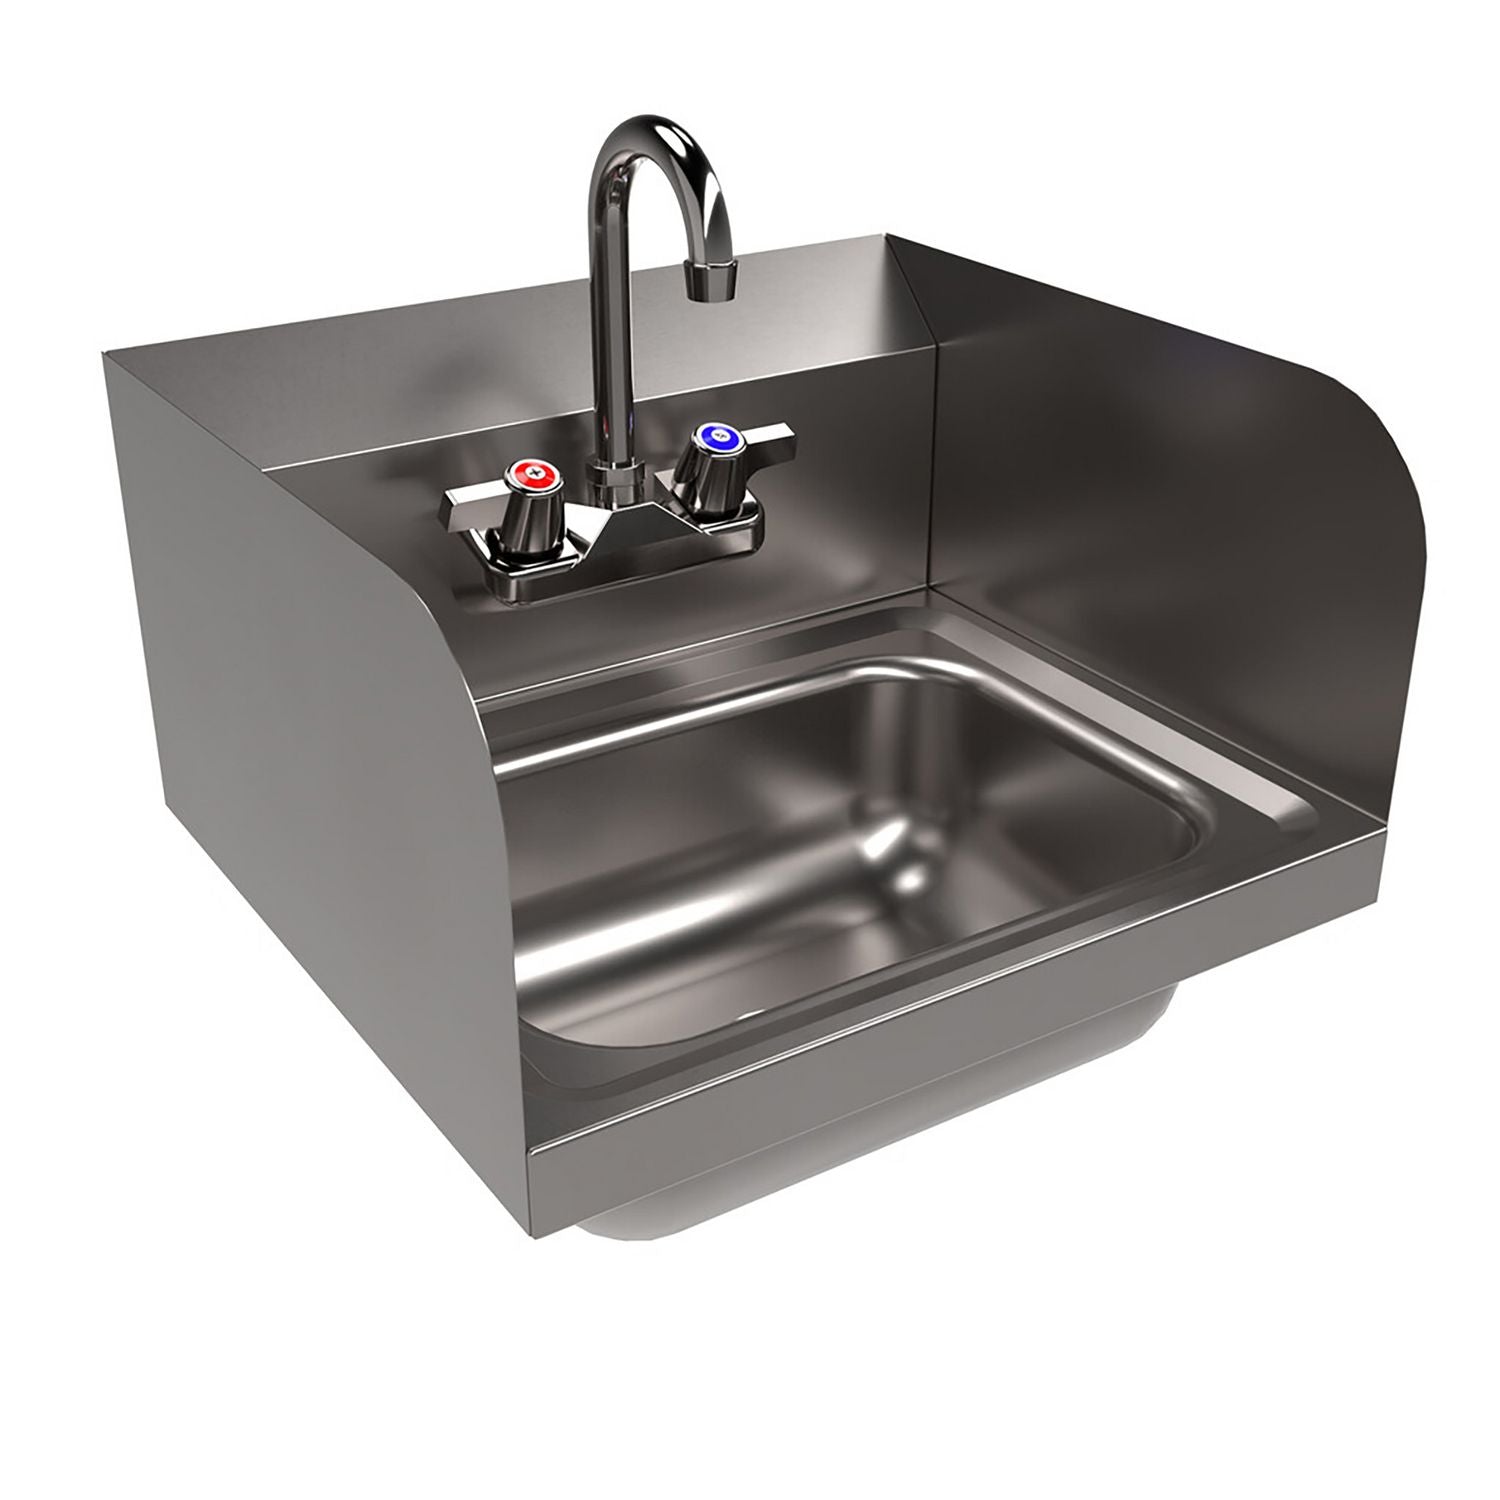 stainless-steel-hand-sink-with-side-splashes-and-faucet-14-l-x-10-w-x-5-h-ships-in-4-6-business-days_bkehsw1410ssp - 2